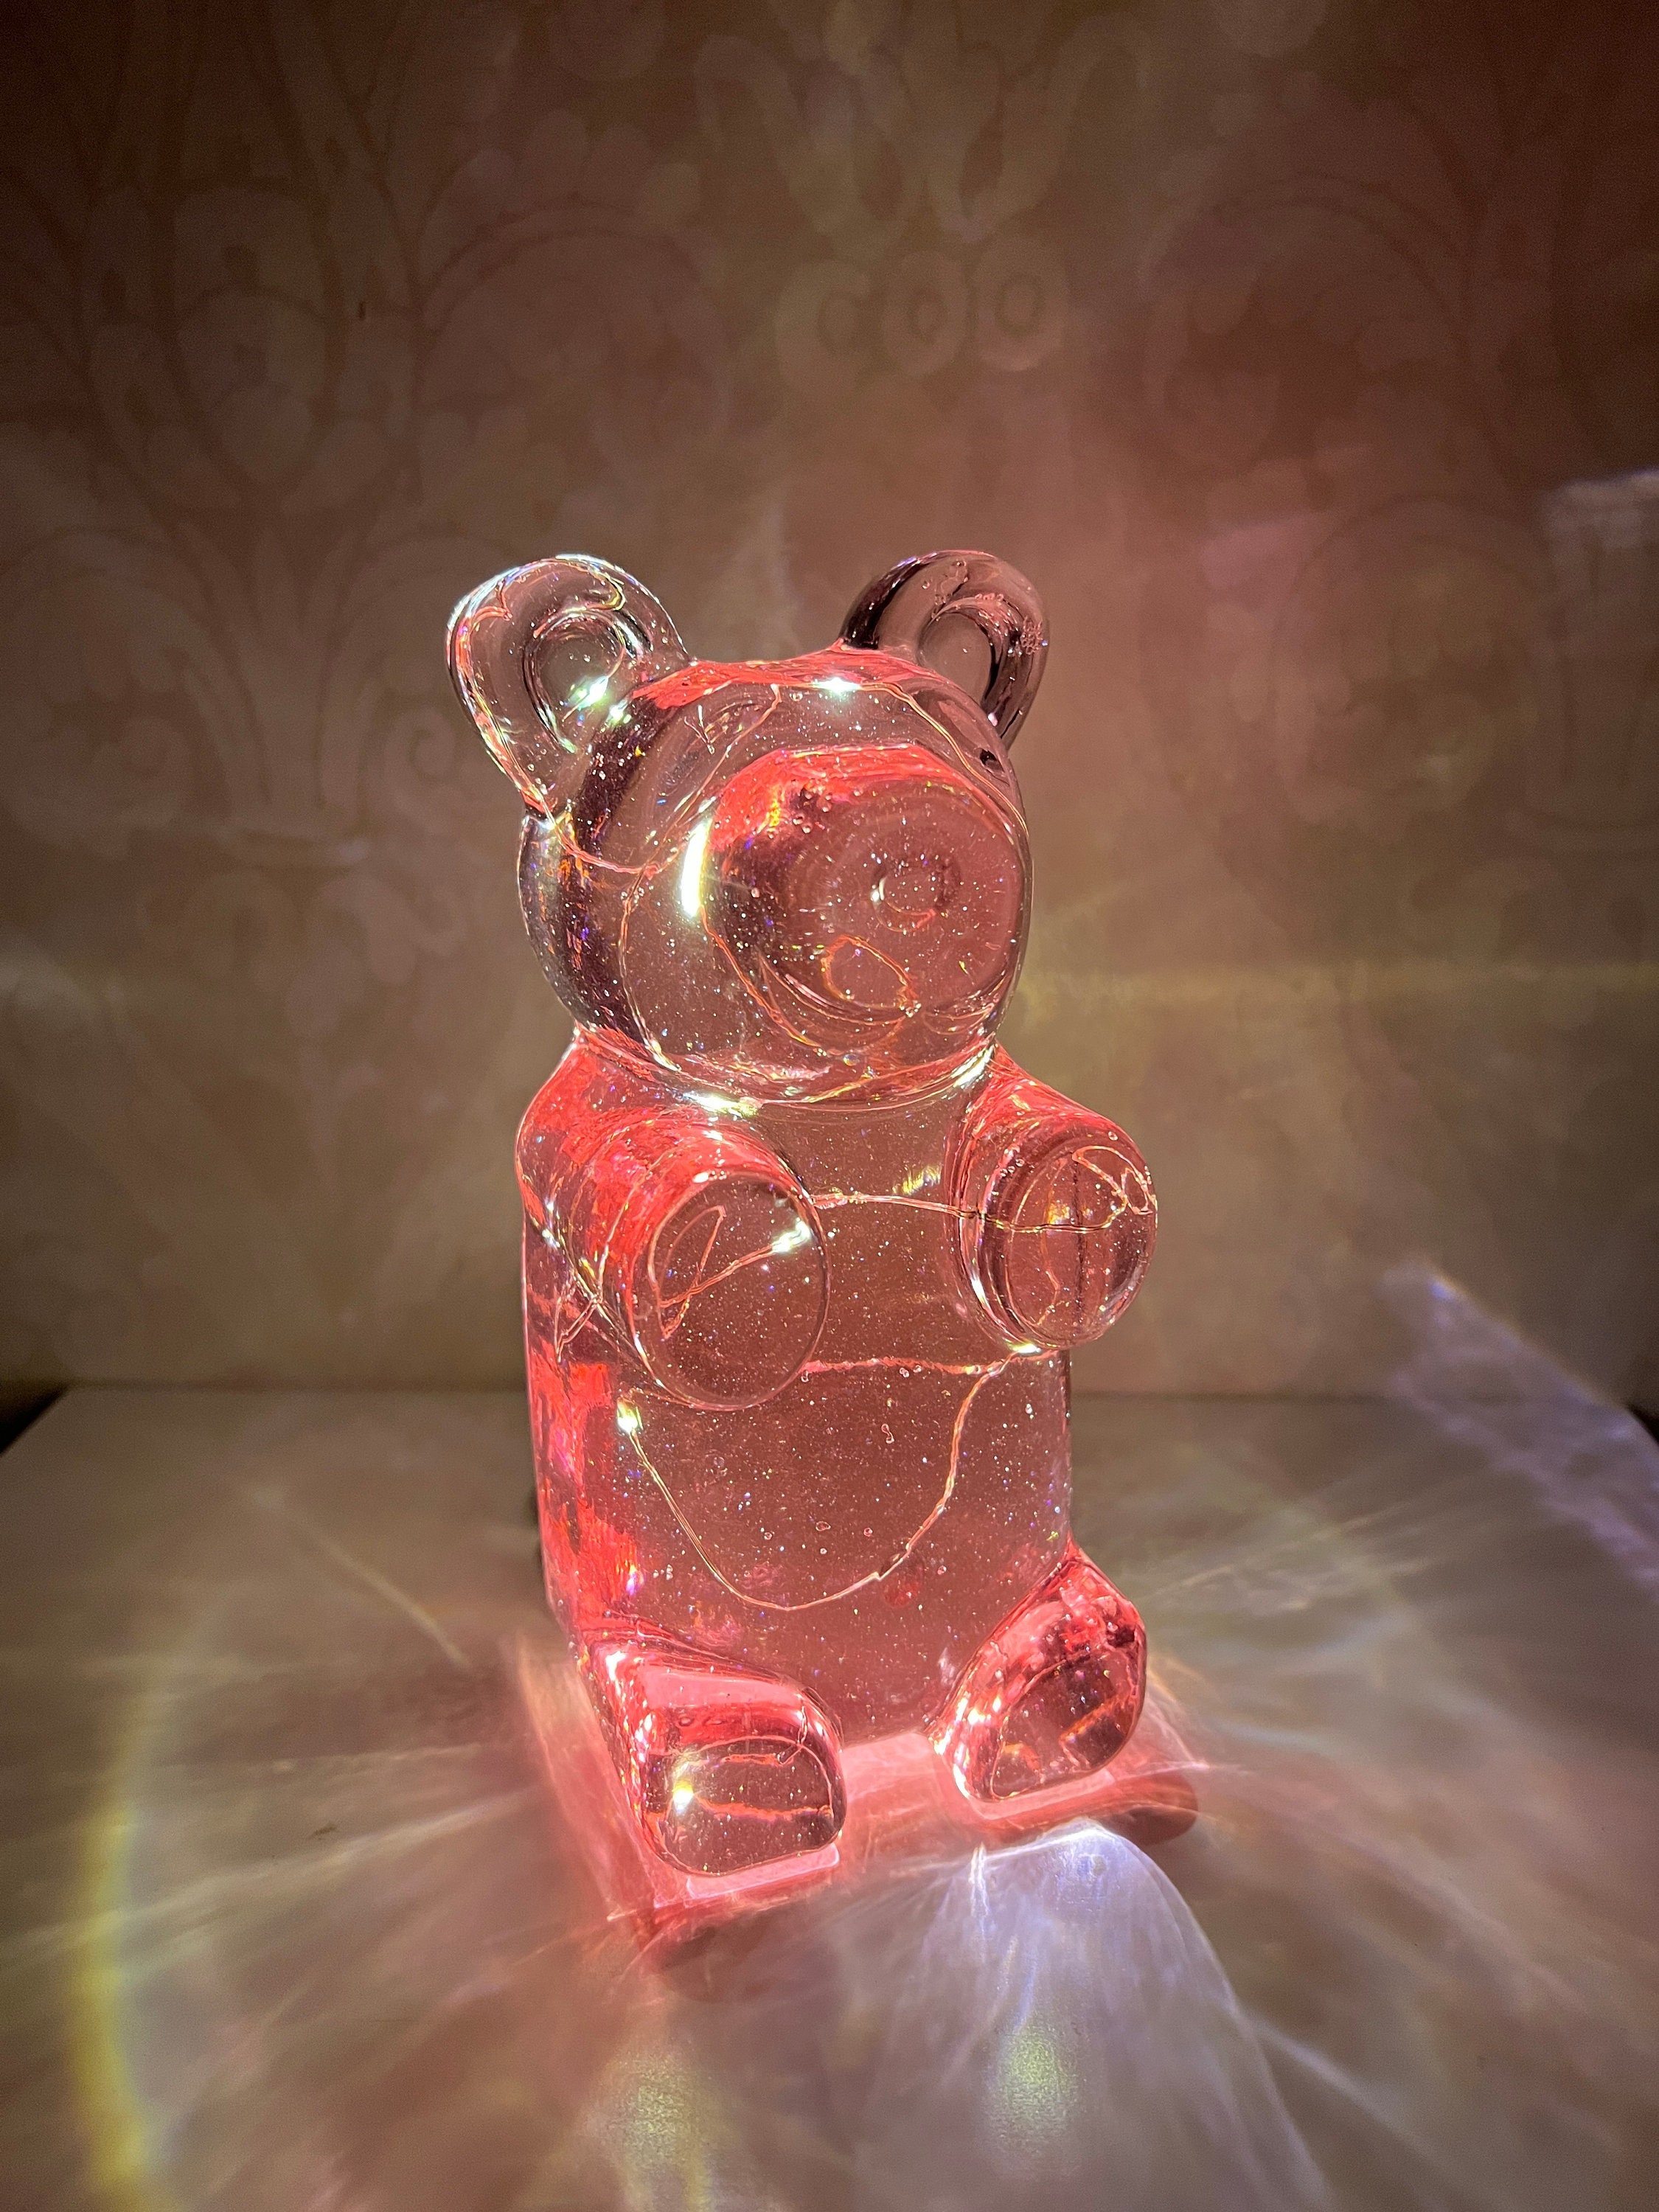 Giant Gummy Bear, Fish and Worm Maker